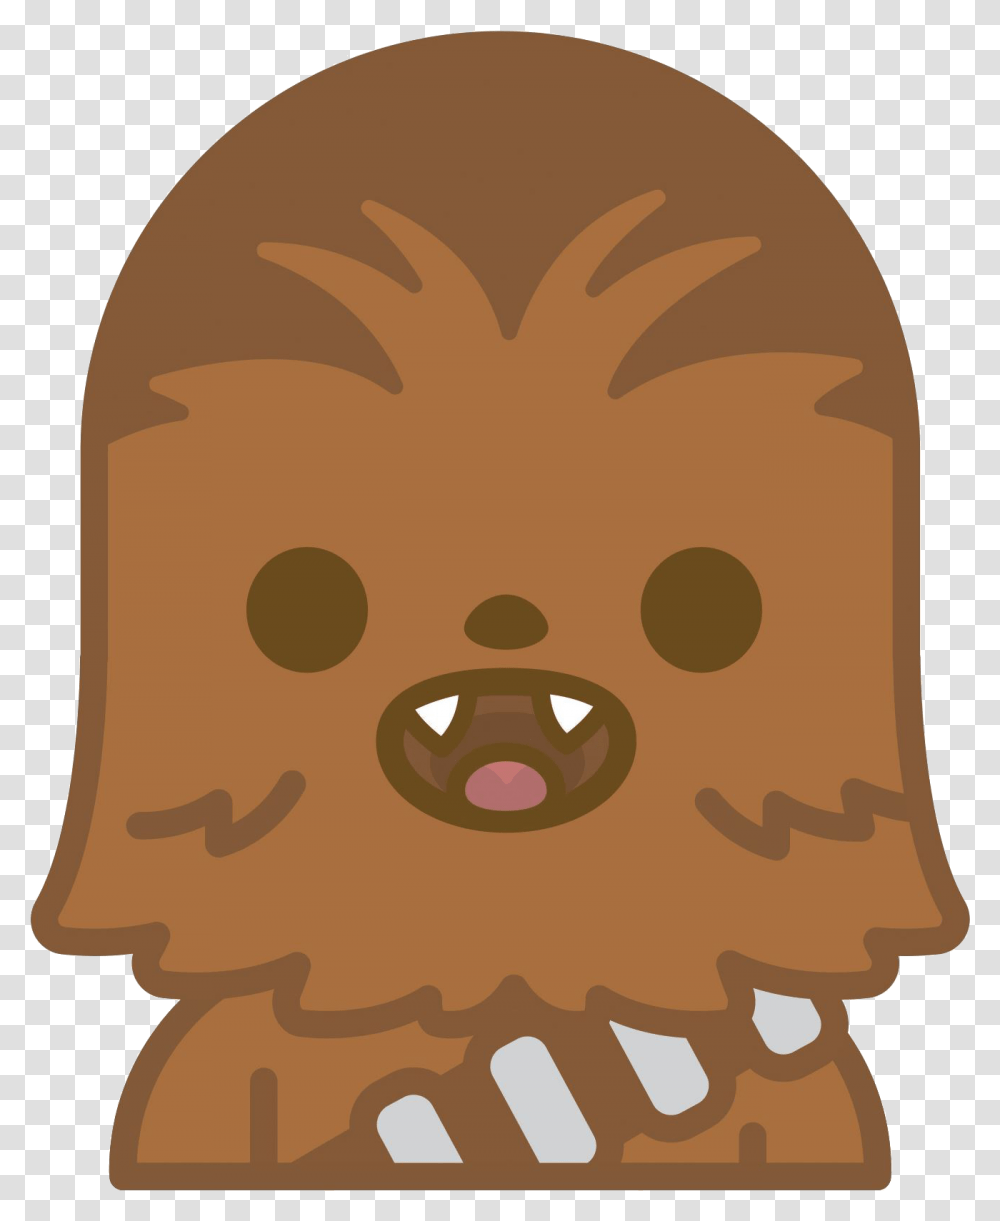 Star Wars Chewbacca Emoji At The Age Of 34, Food, Head, Cookie, Biscuit Transparent Png